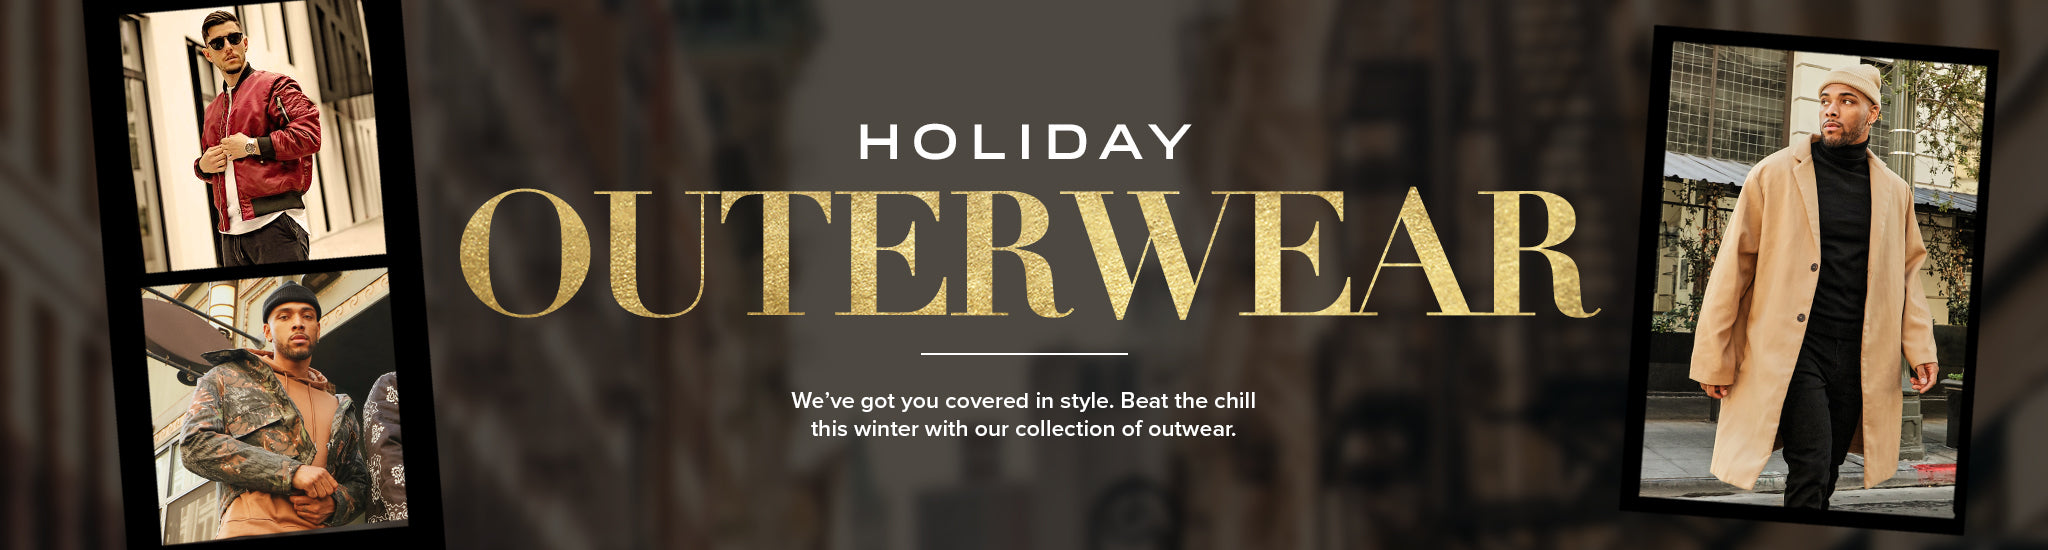 Men's Holiday Outerwear